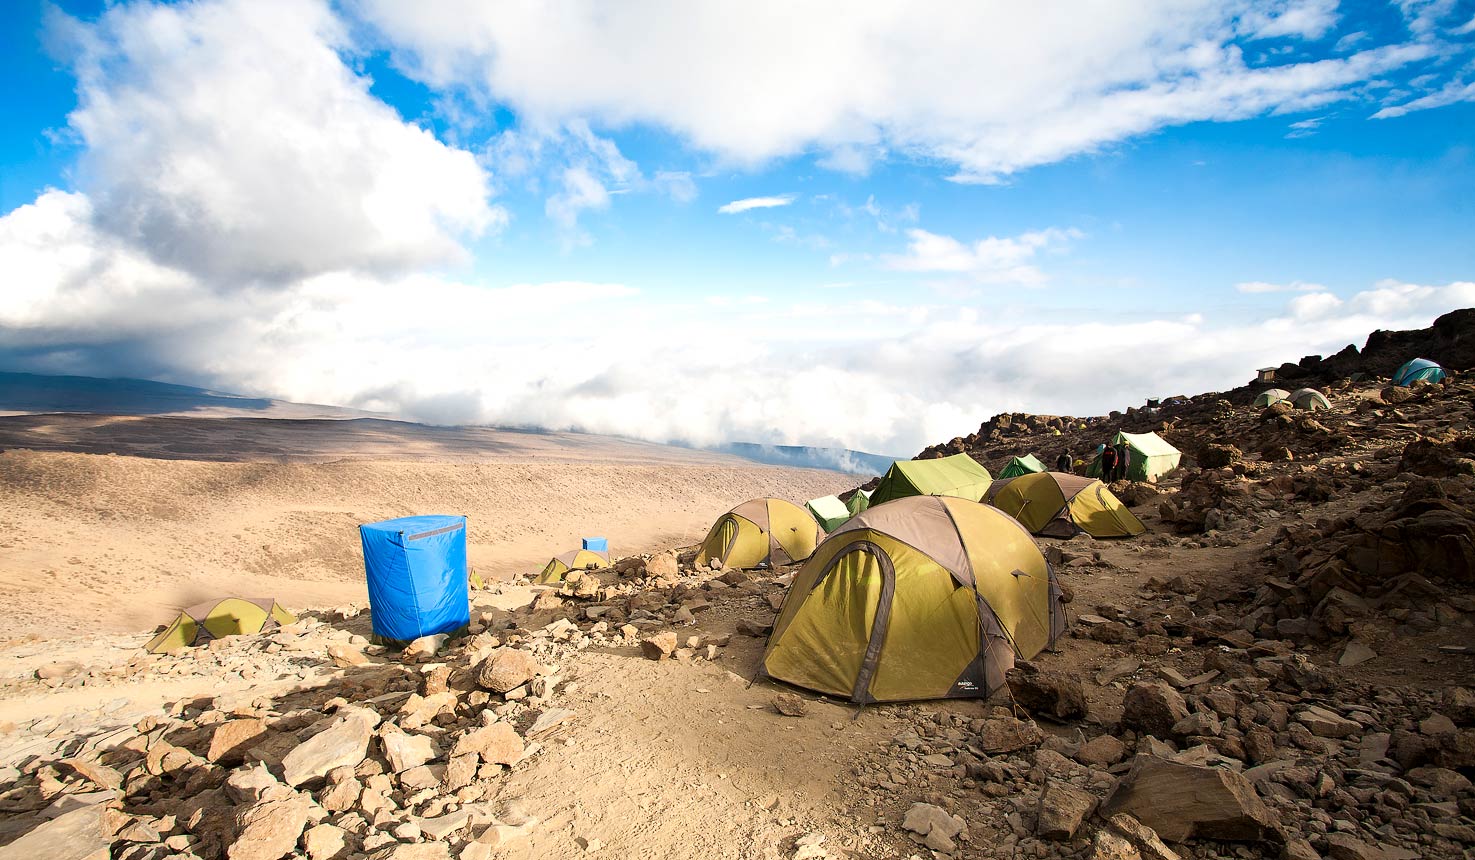 Mount Kilimanjaro Frequently Asked Questions